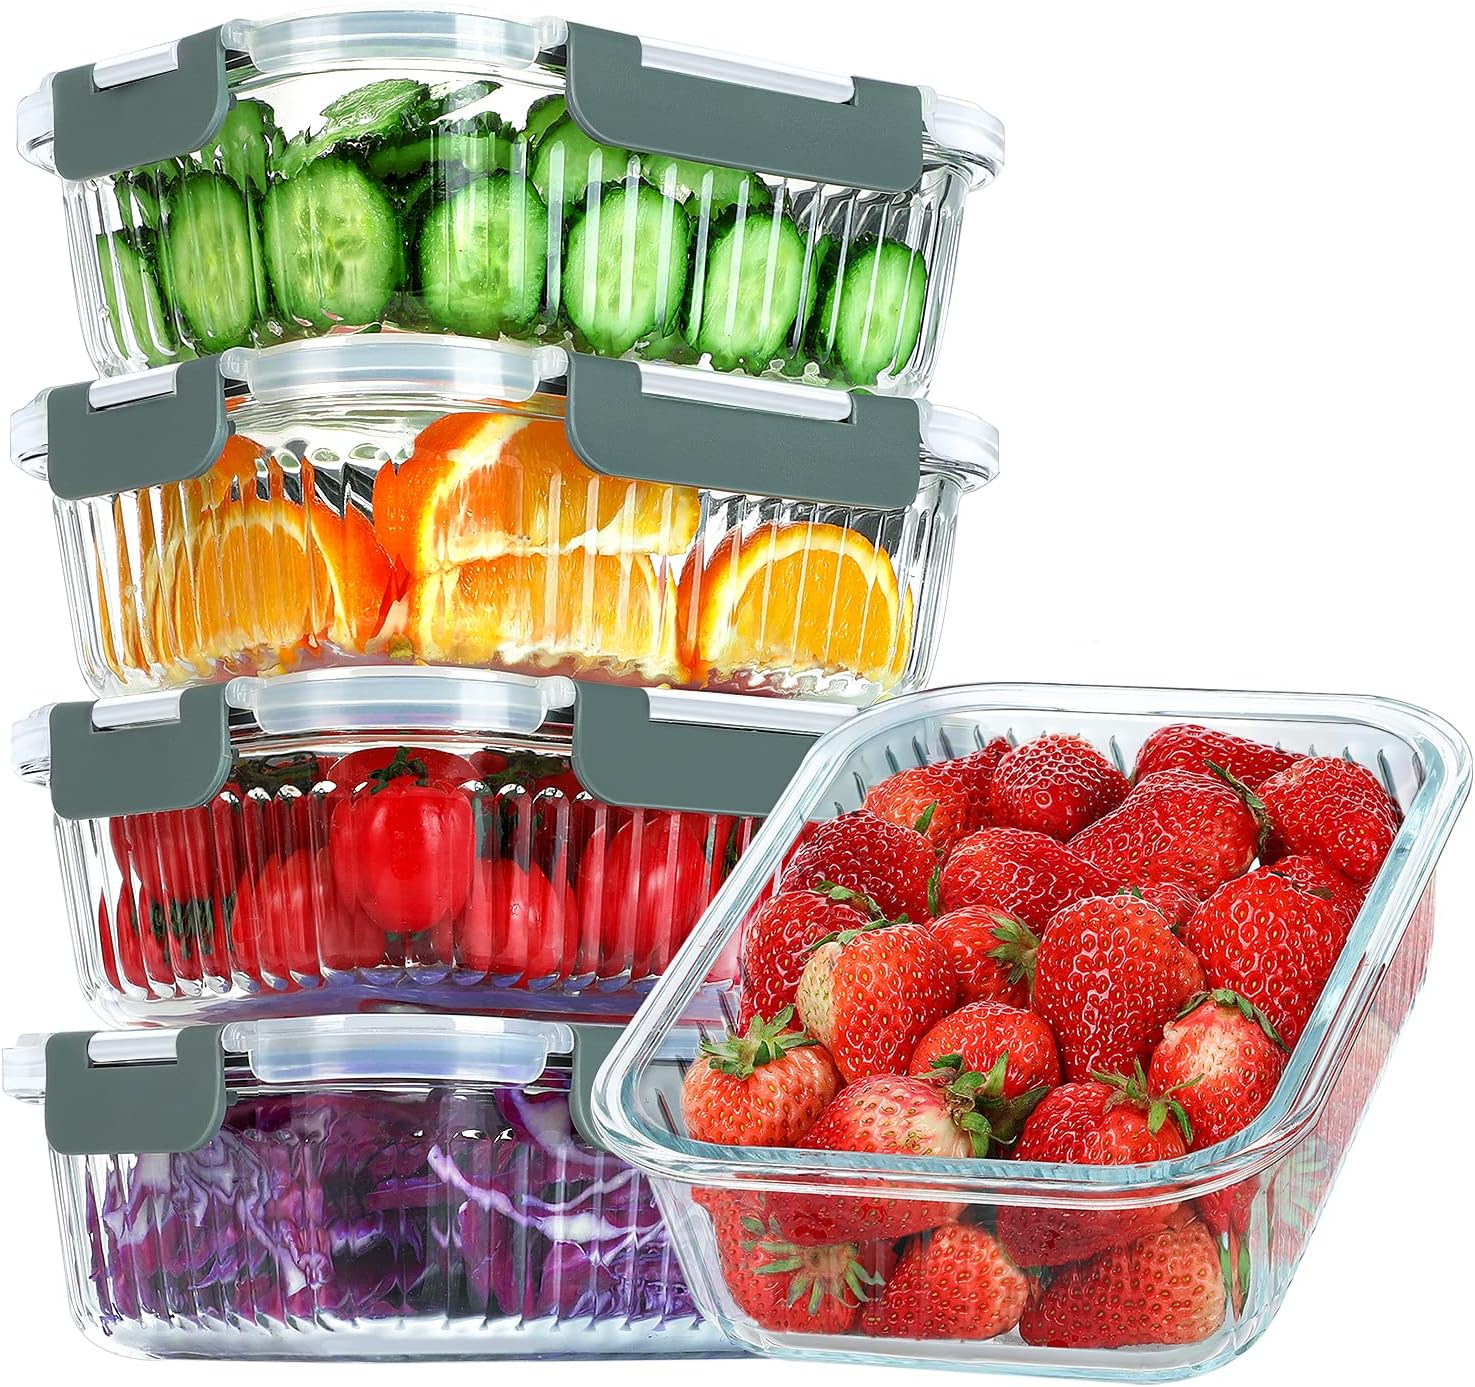 KOMUEE 5 Packs 36 oz Glass Food Storage Containers